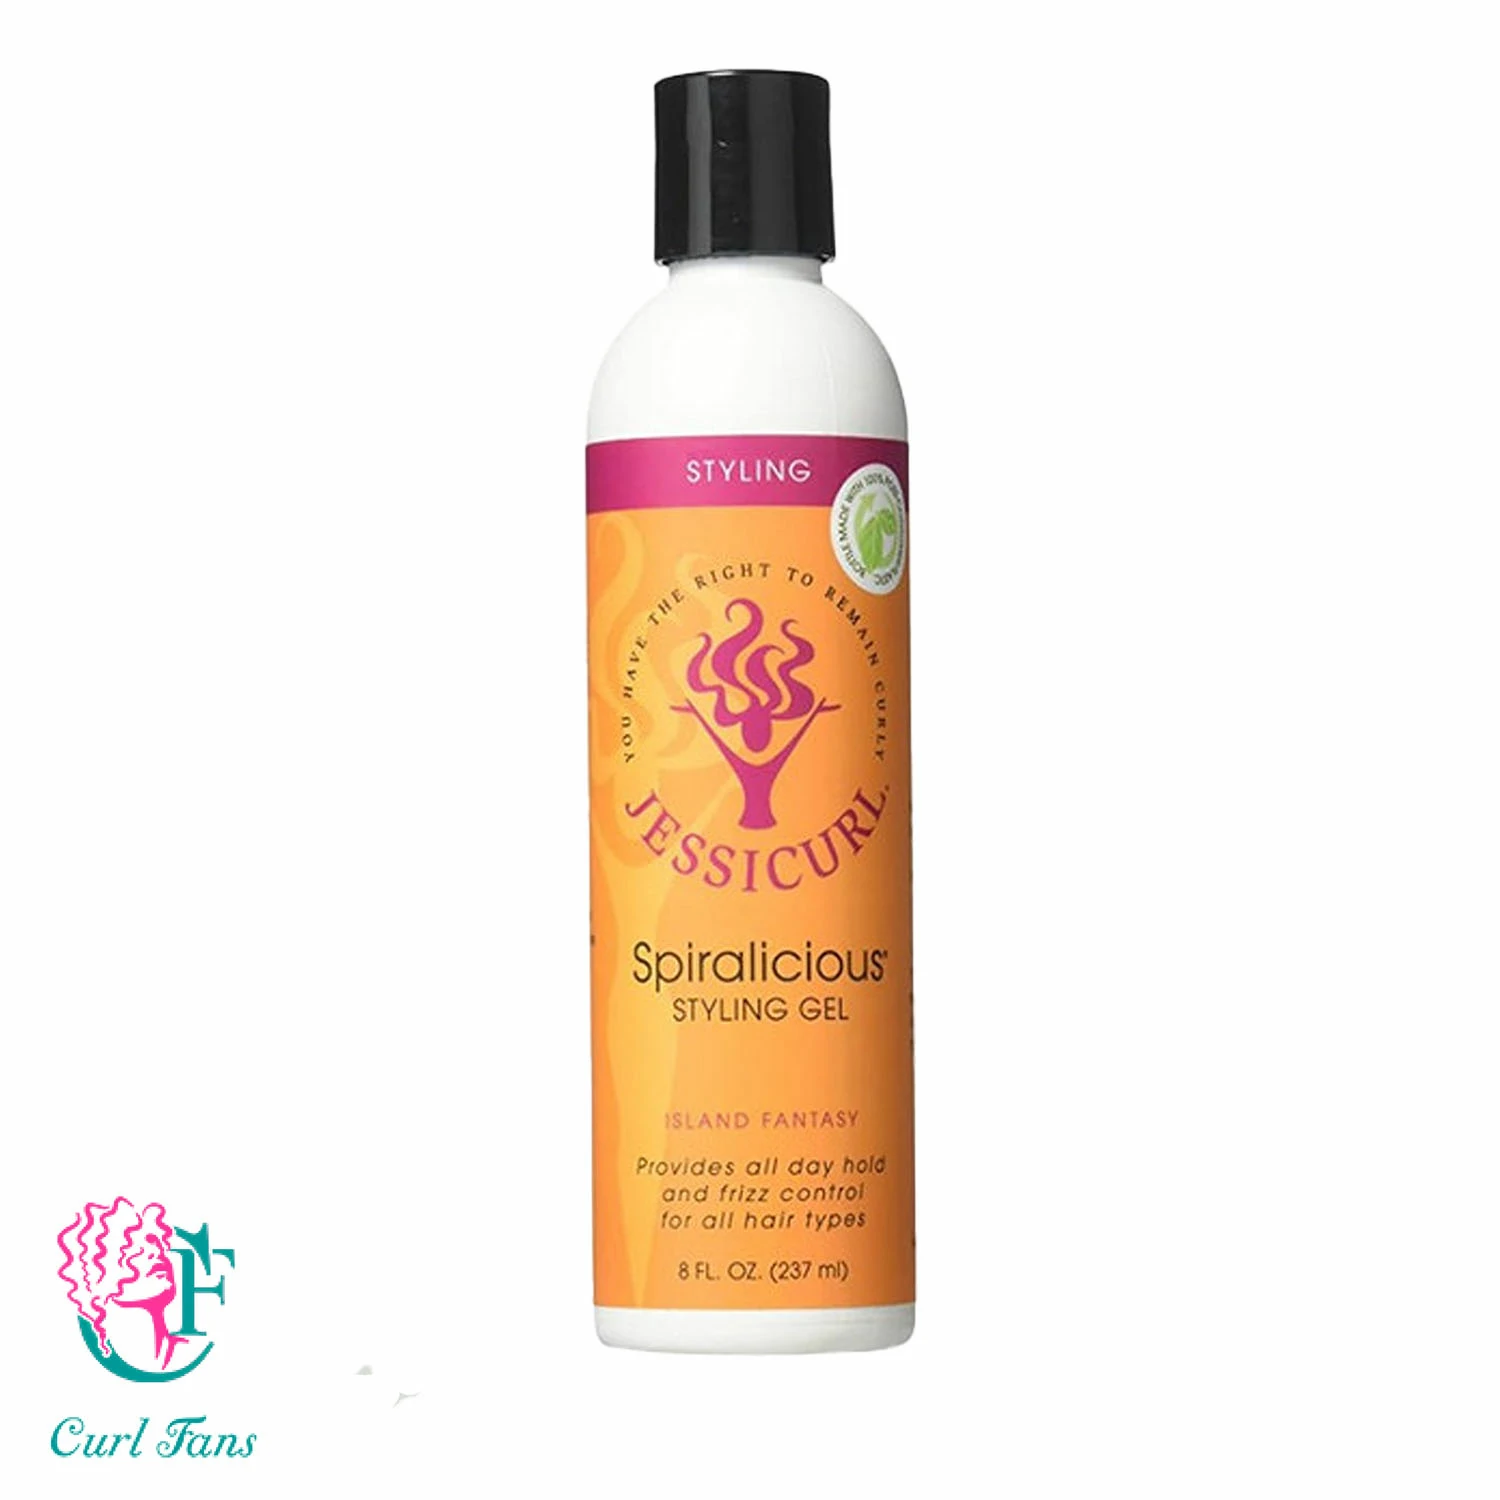 Jessicurl Spiralicious Styling Gel - A center for curly hair